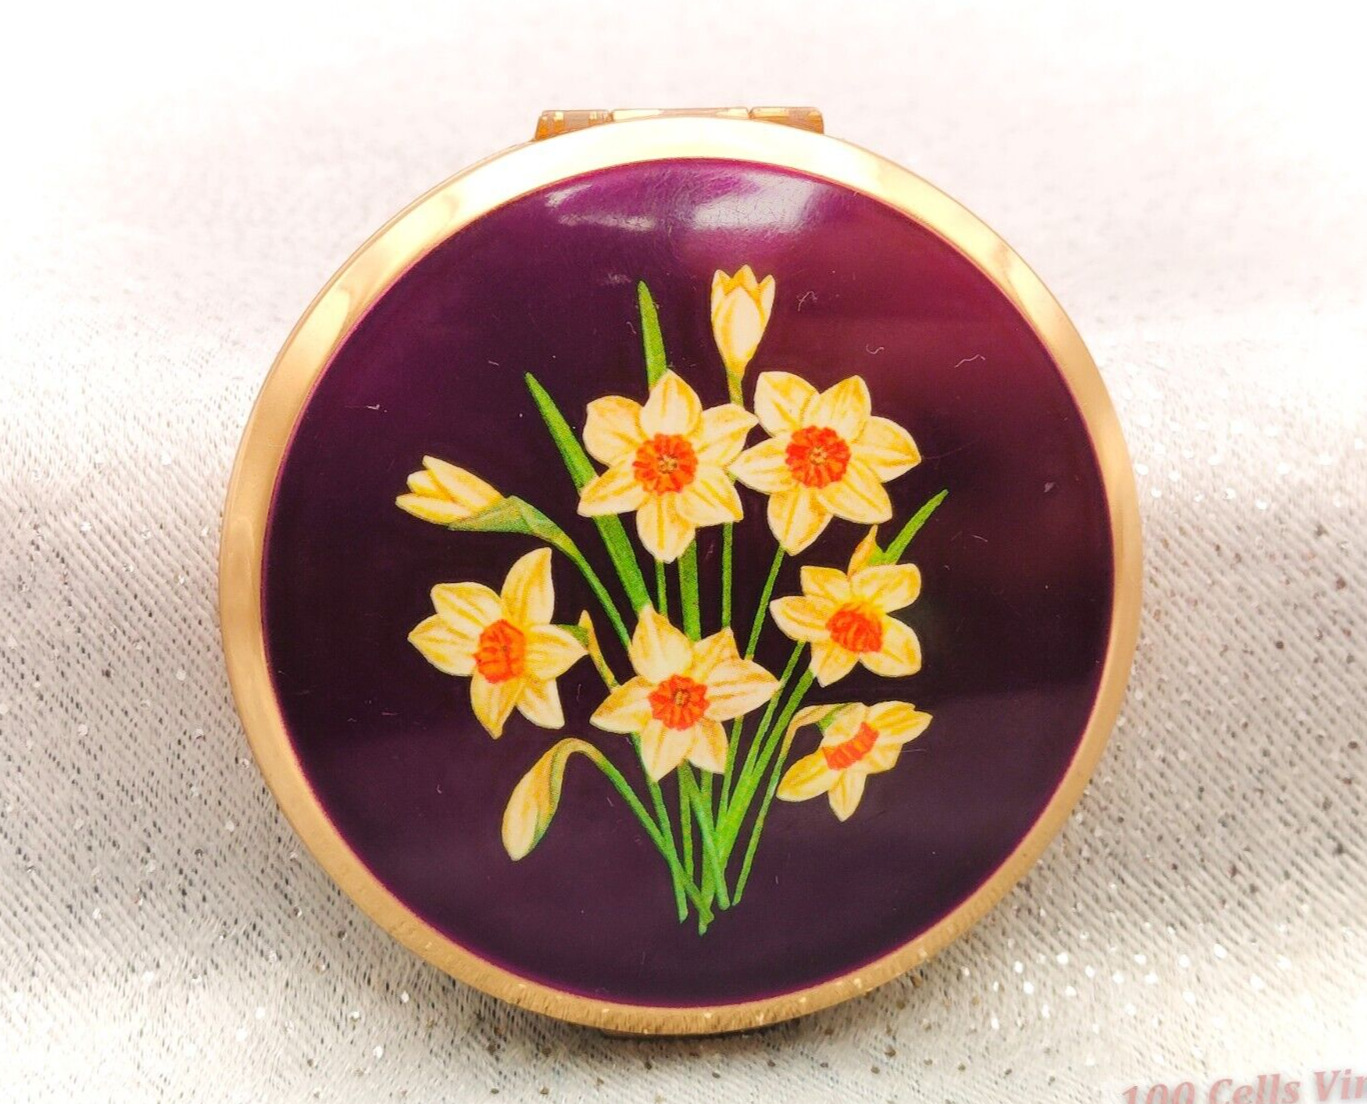 Stratton Stunning Purple with Daffodils/Floral-Vintage Ladies Powder Compact-8cm